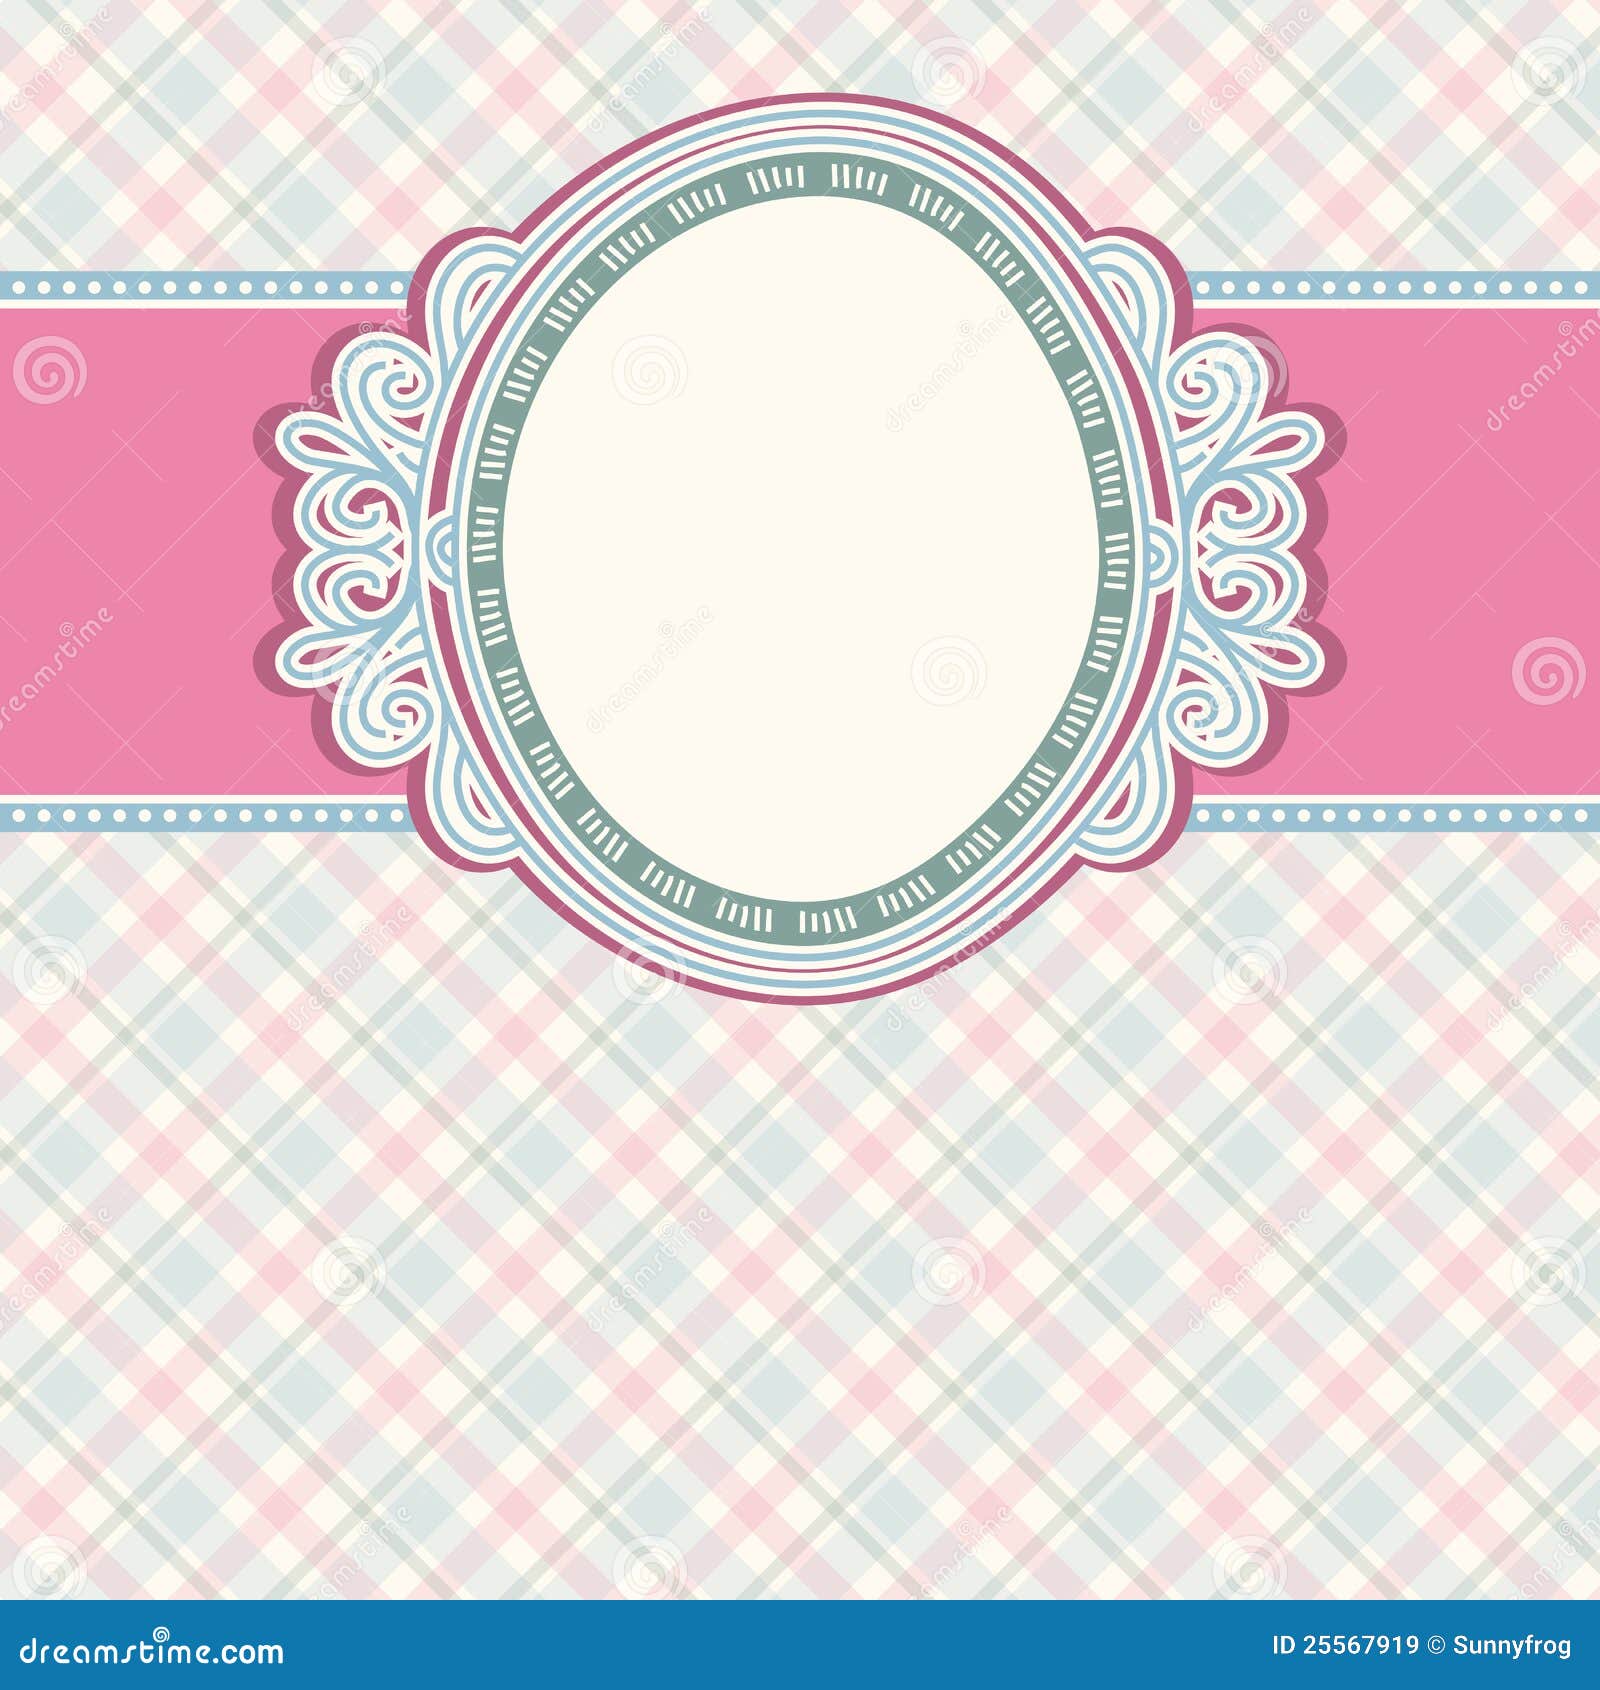 round label on color checked background, 